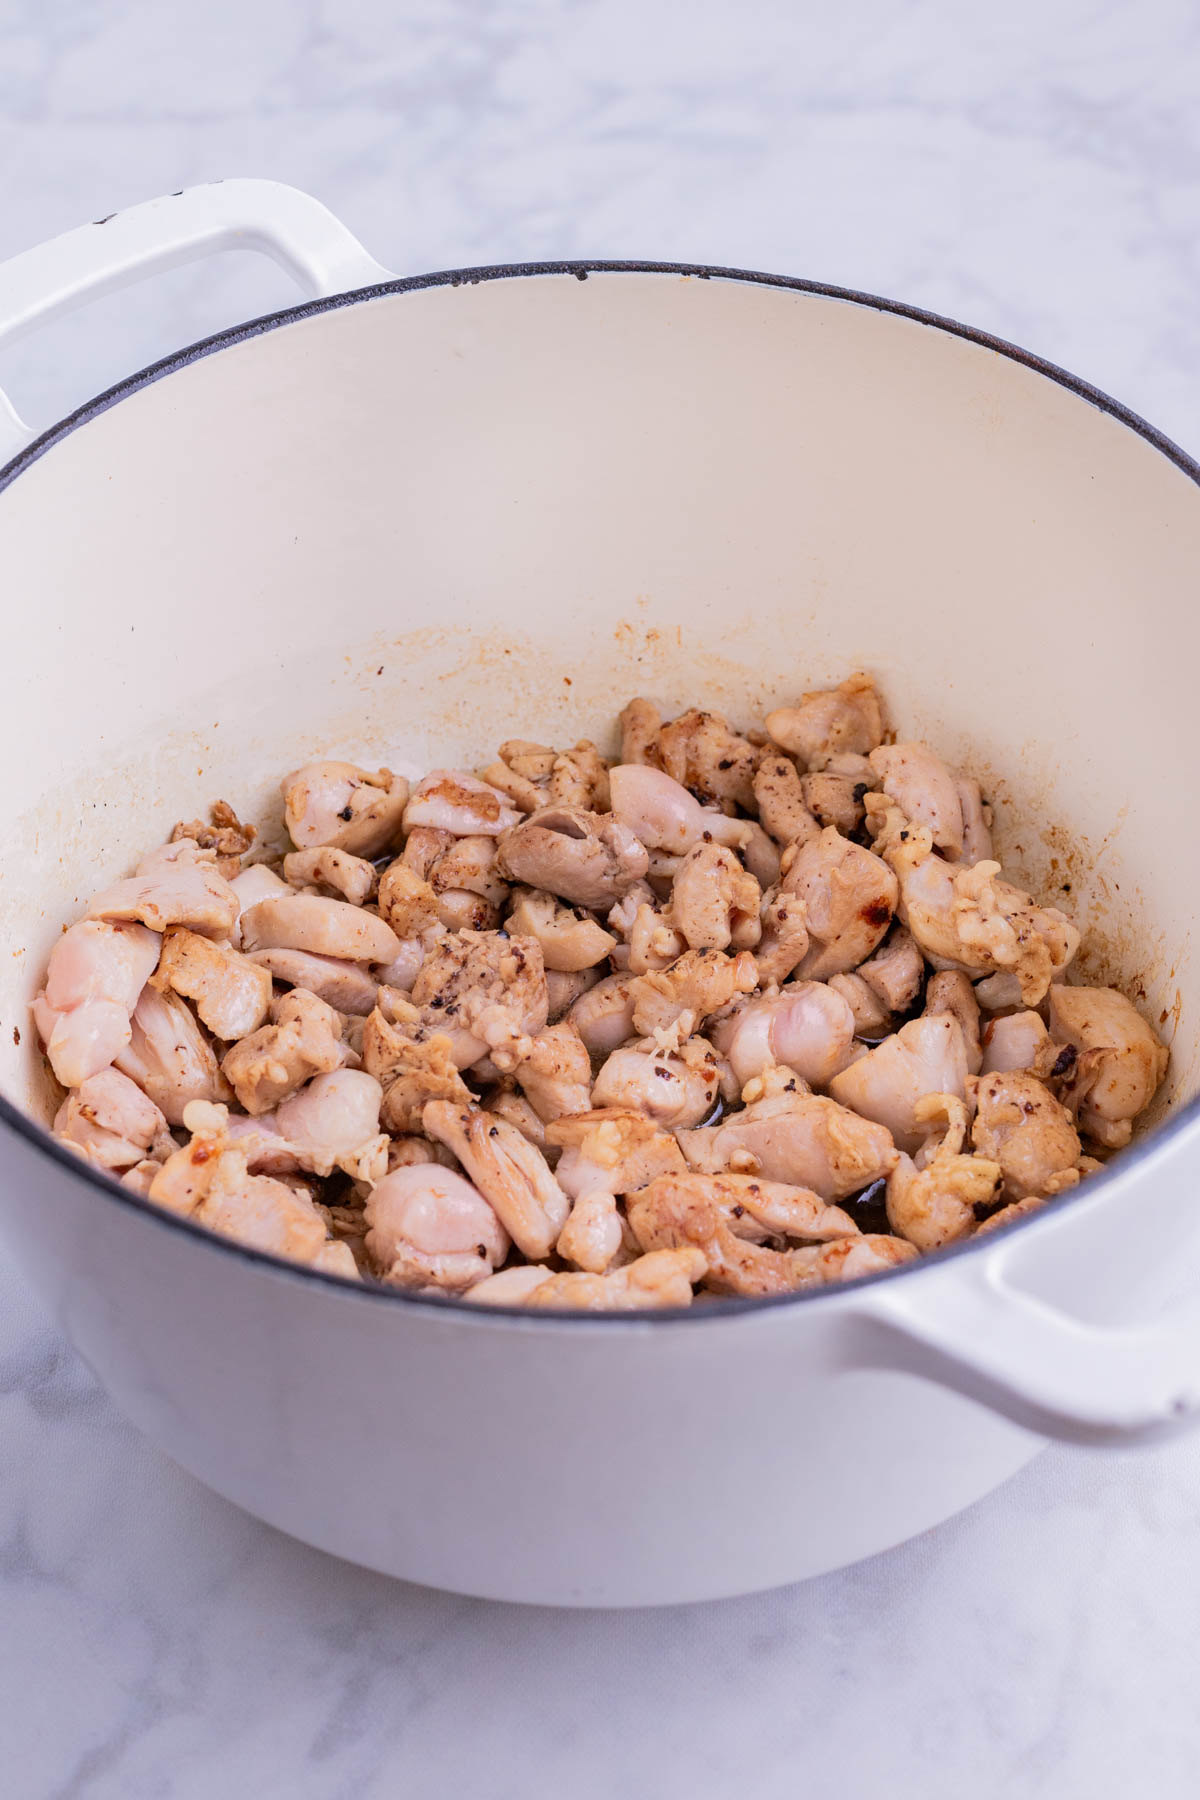 Chicken is cooked in a Dutch oven.